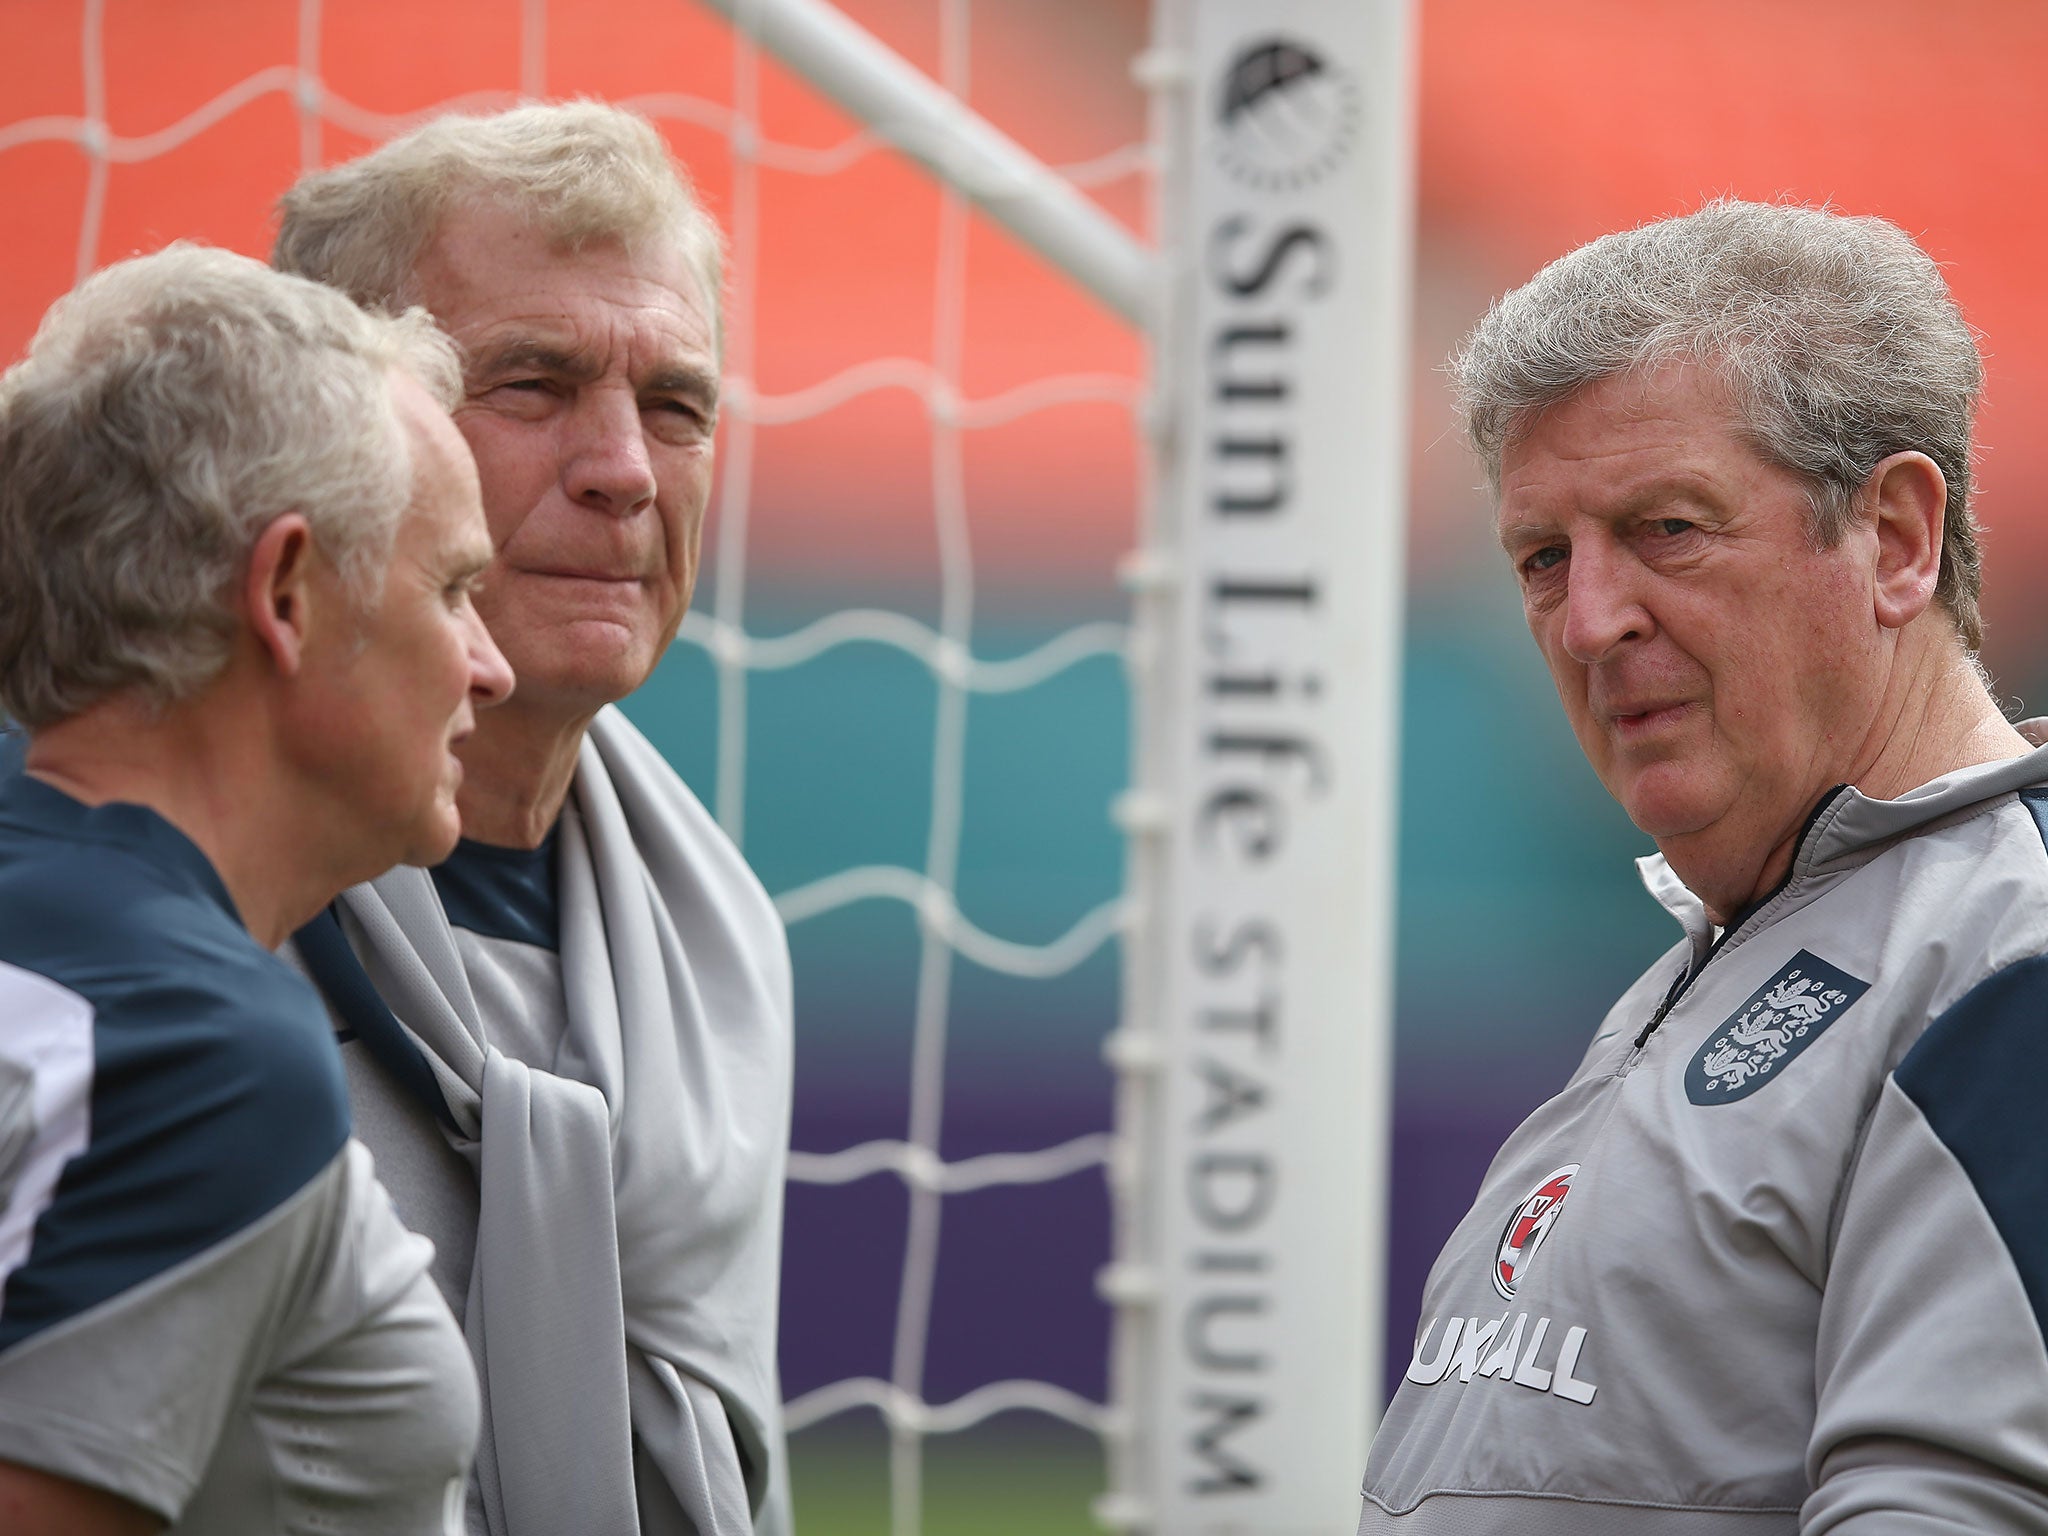 Roy Hodgson talks with Sir Trevor Brooking and Dr Steve Peters (L) during an England training session at The Sunlife Stadium